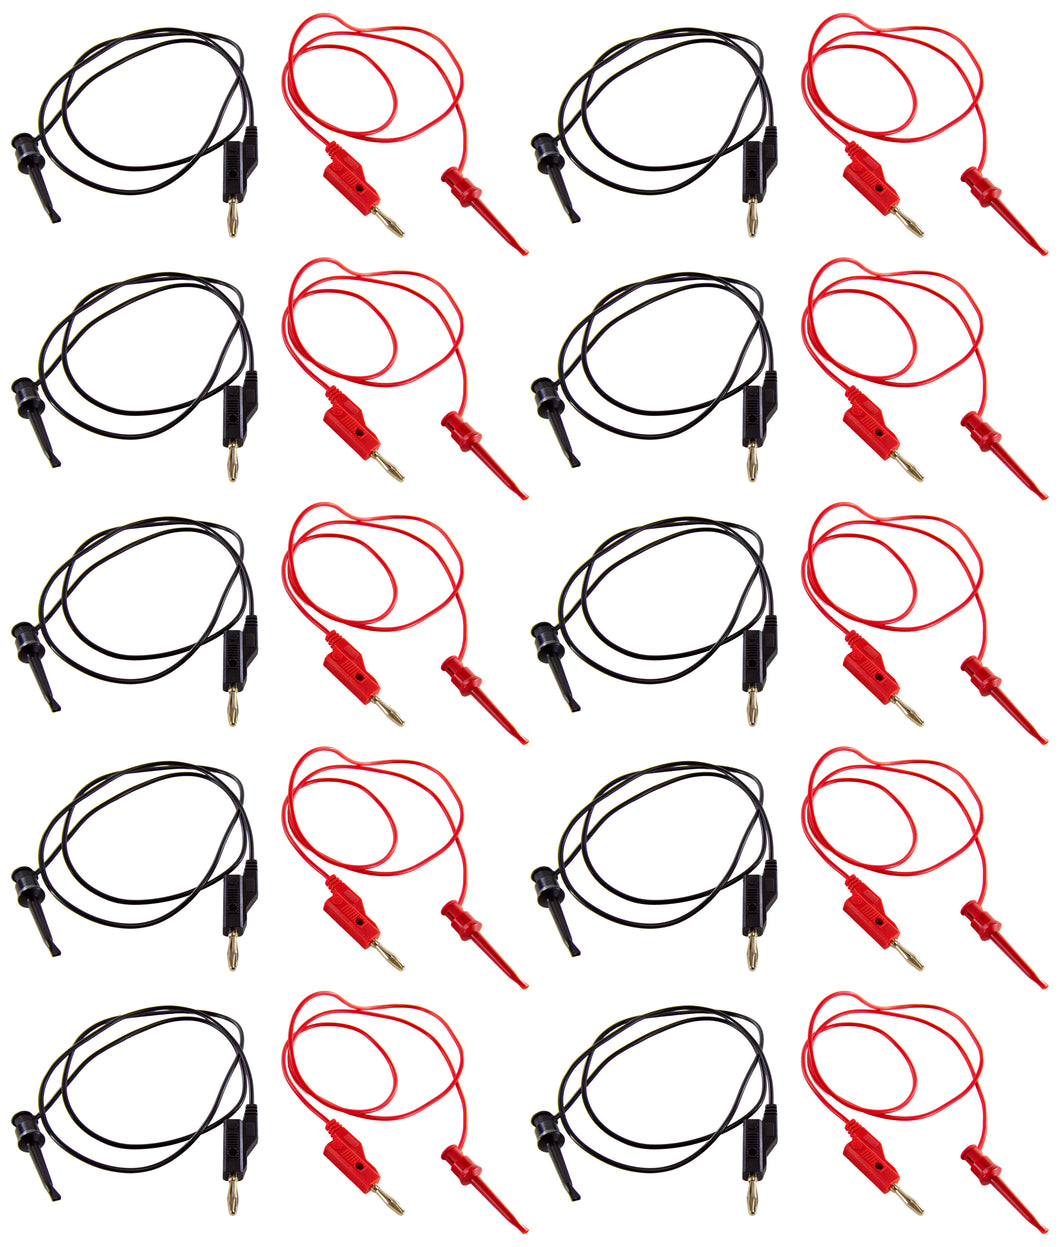 10 Pack Banana to IC Hook Test Lead Sets (10 Red and 10 Black Leads)